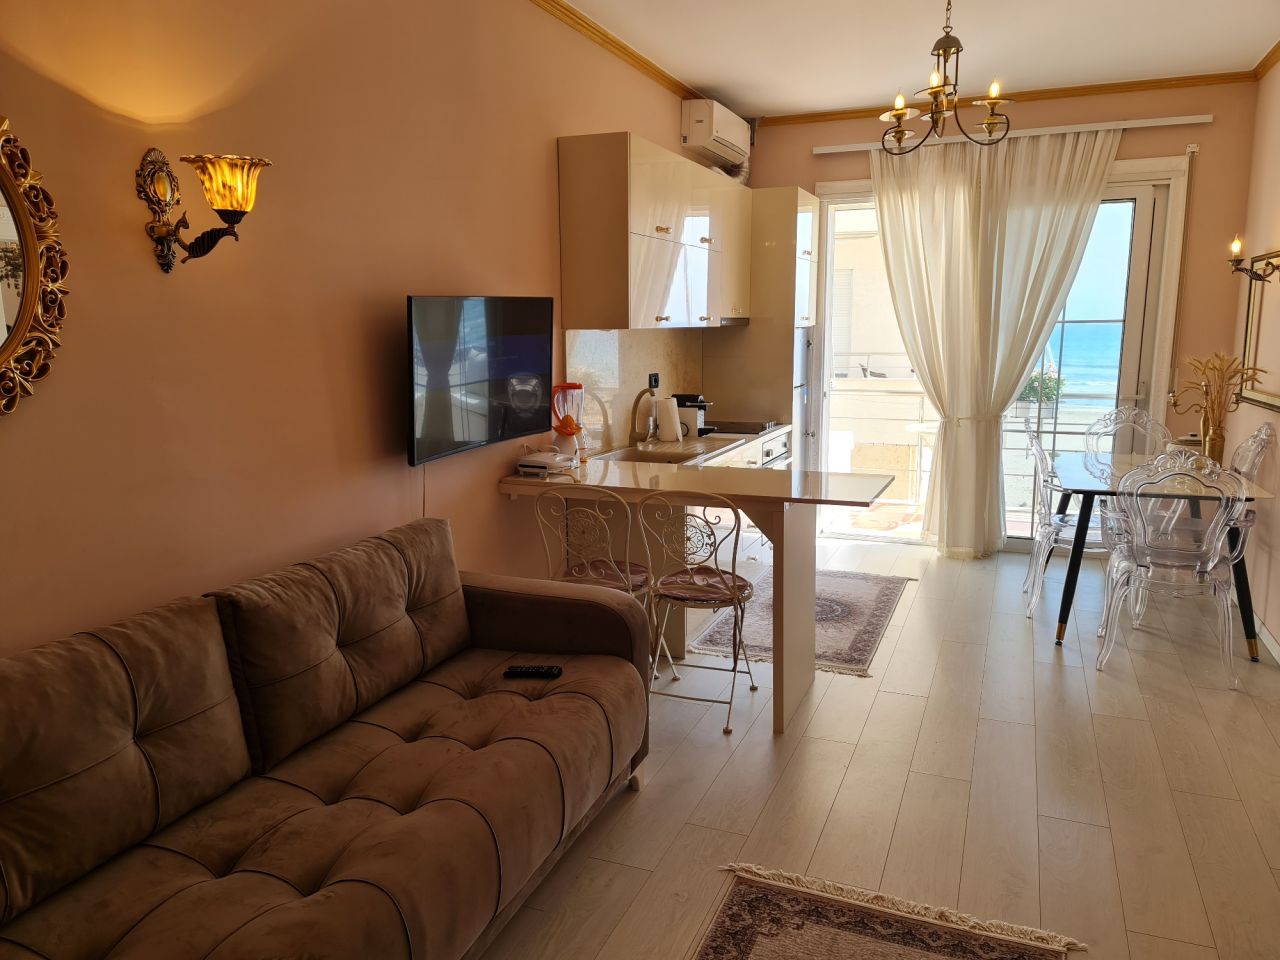 Albania Vacation Apartment For Rent in Vlore